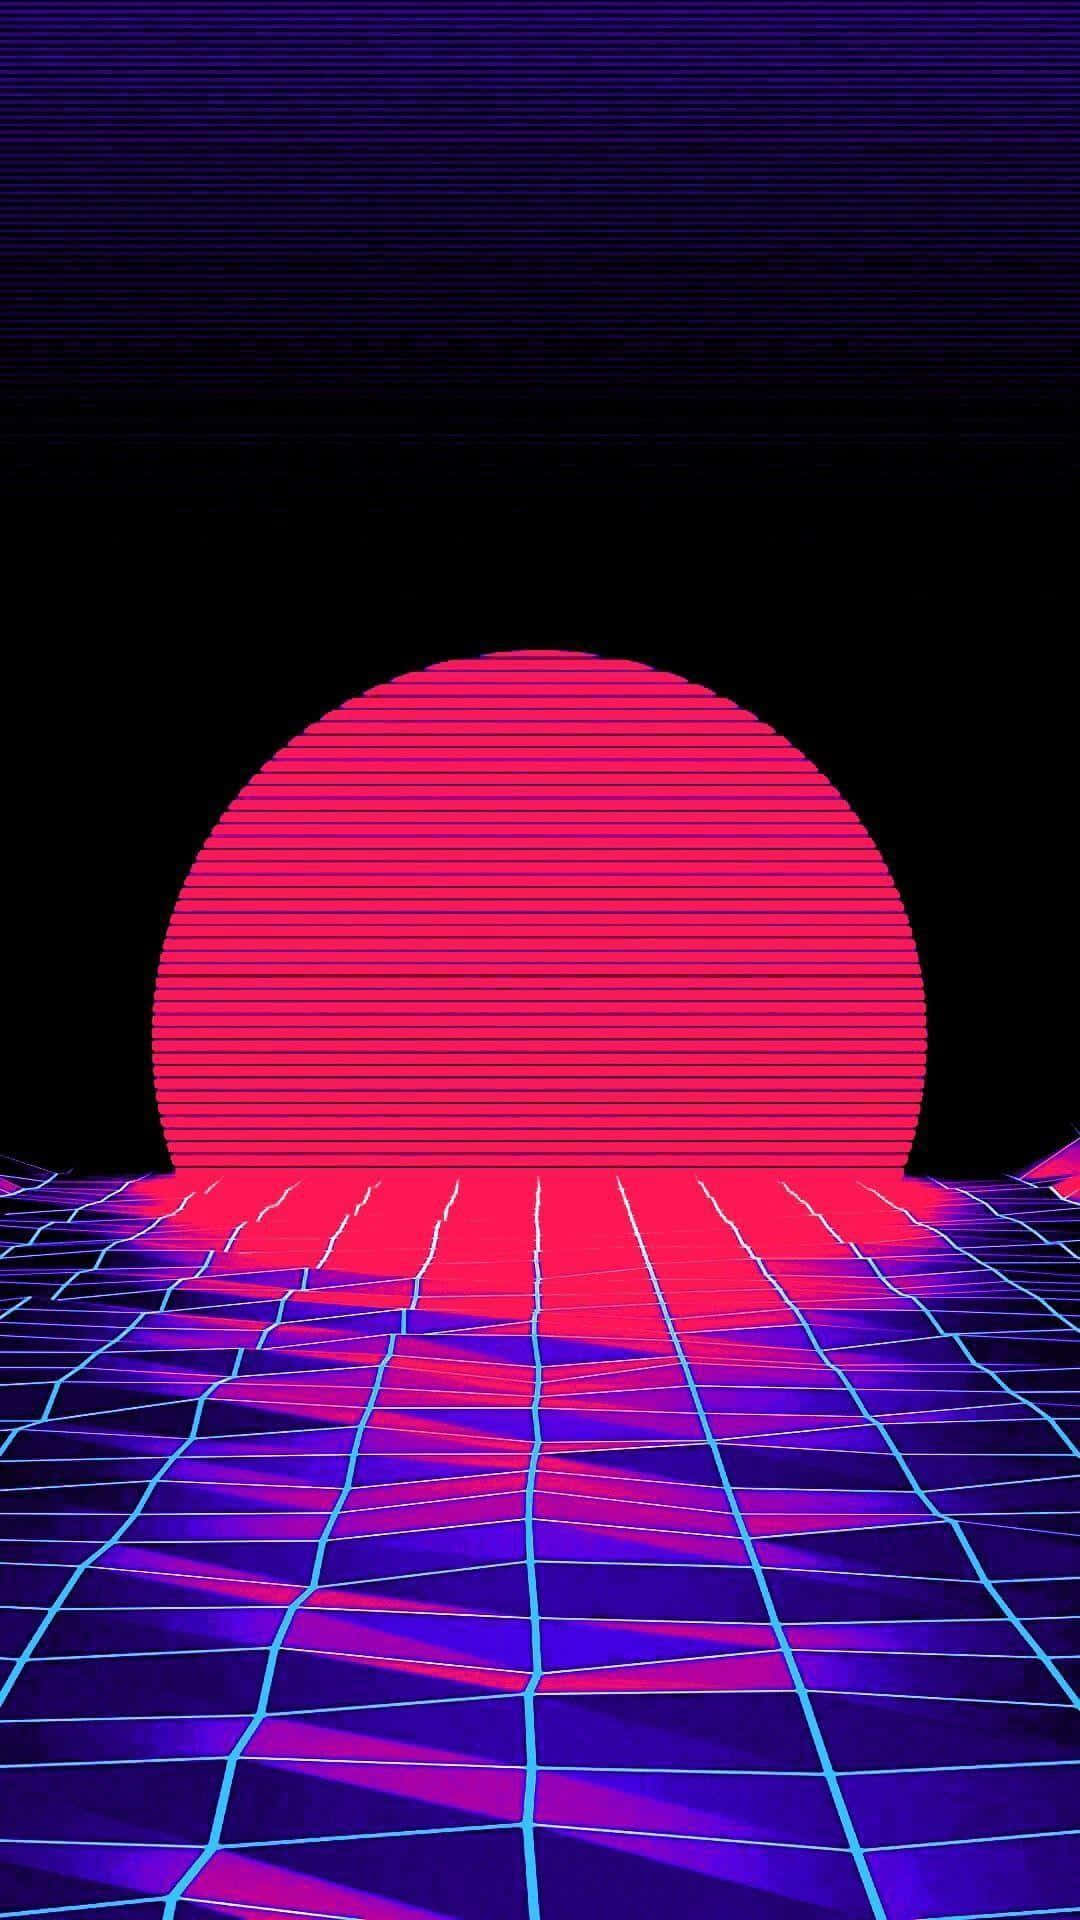 "Bring your retro vibes to the present with this 80s Aesthetic iPhone wallpaper" Wallpaper